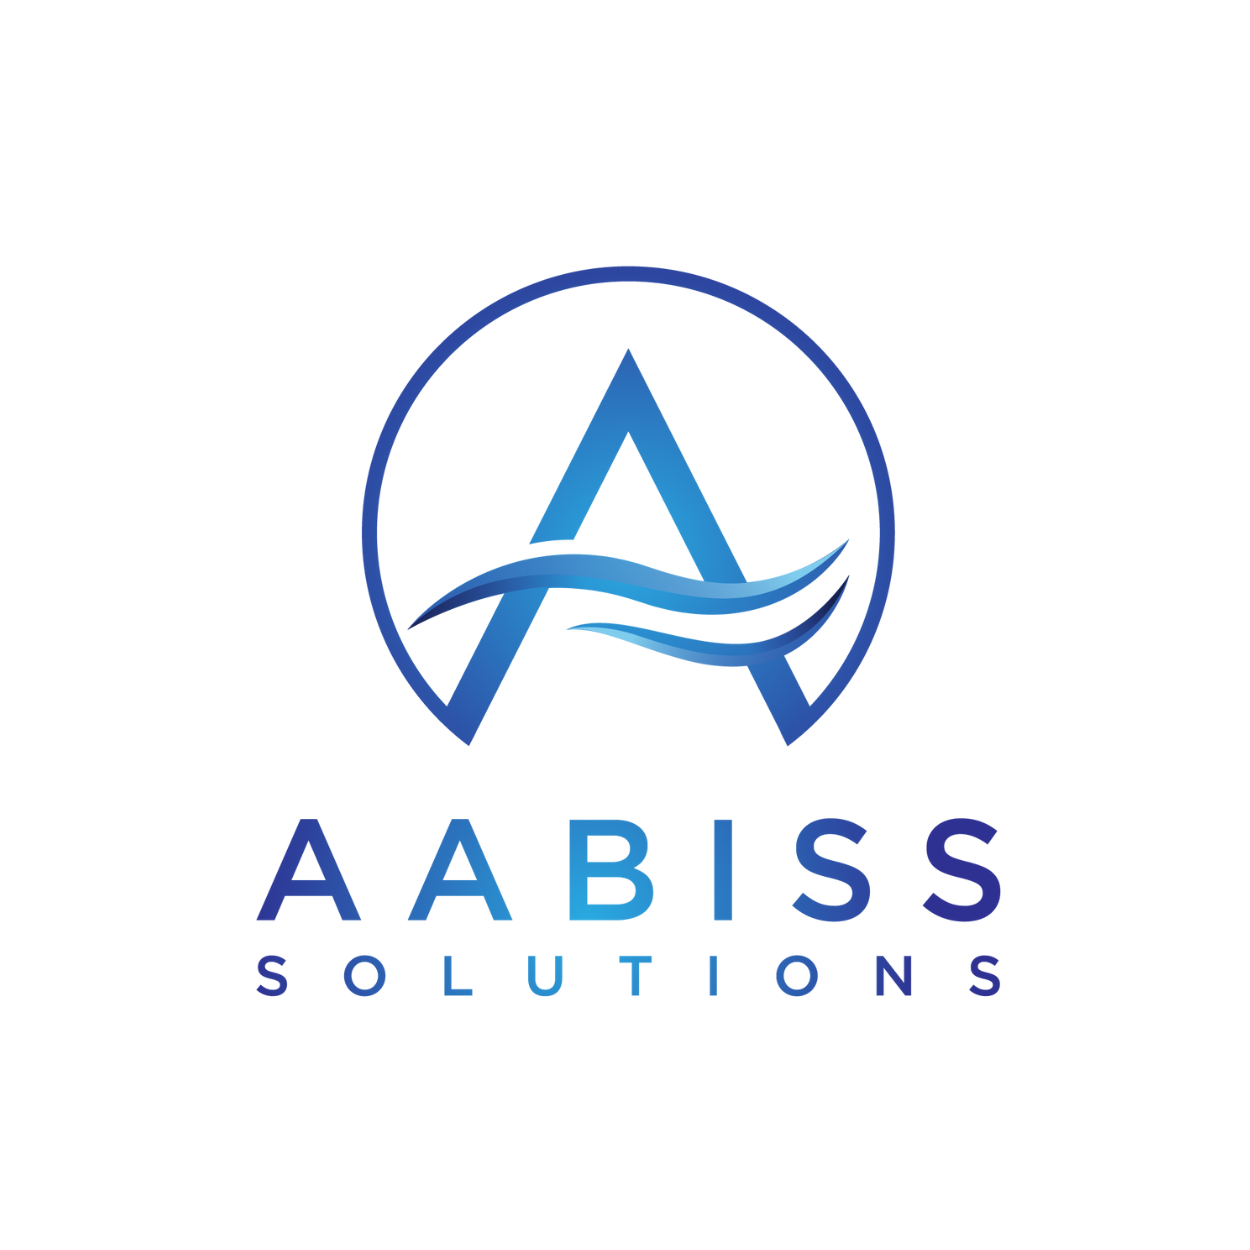 AABISS SOLUTIONS